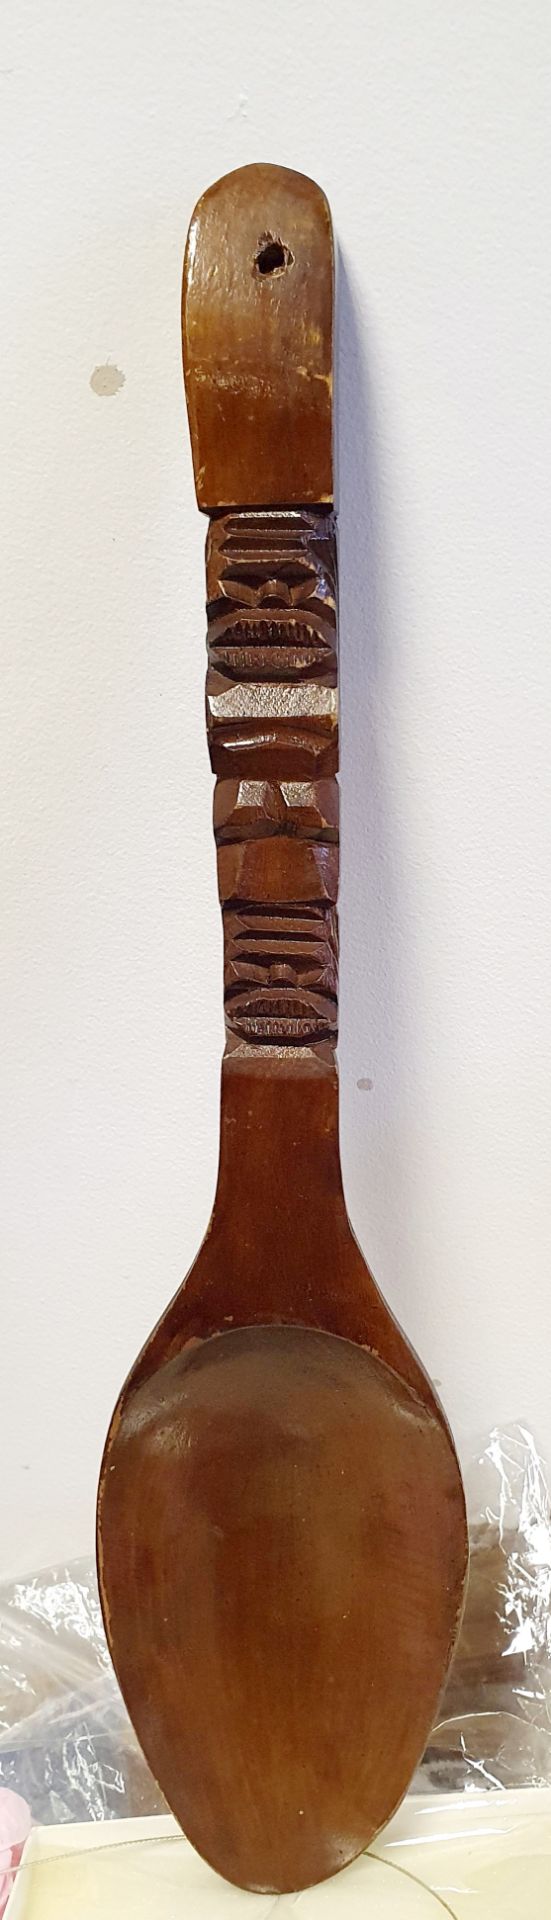 Large wooden tribal spoon